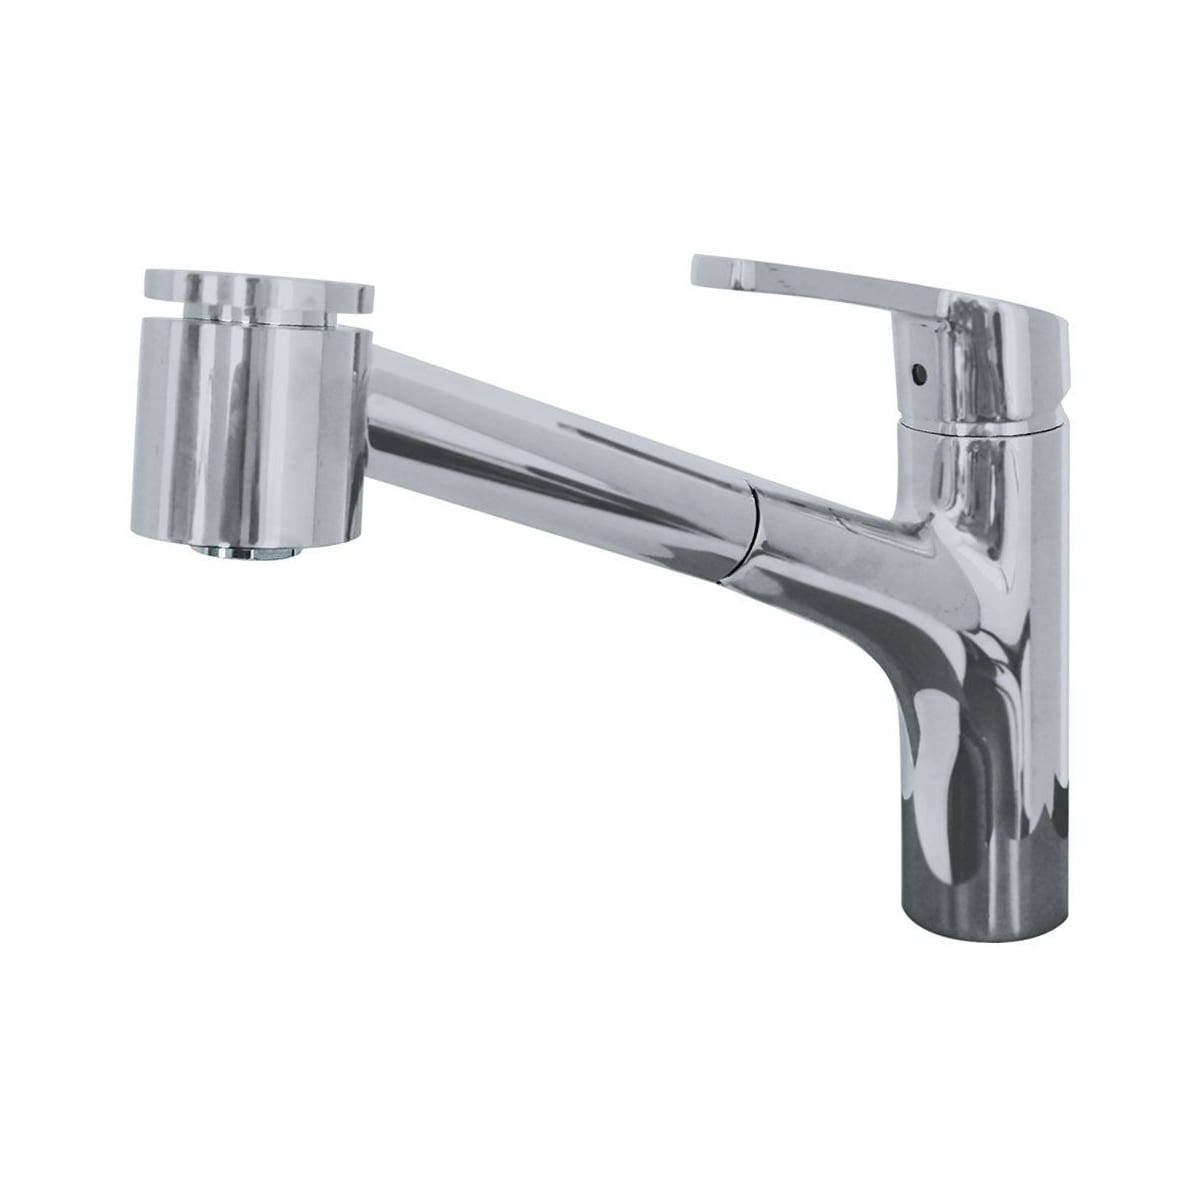 Franke Ffps20280 Satin Nickel Sion Pull Out Spray Kitchen Faucet